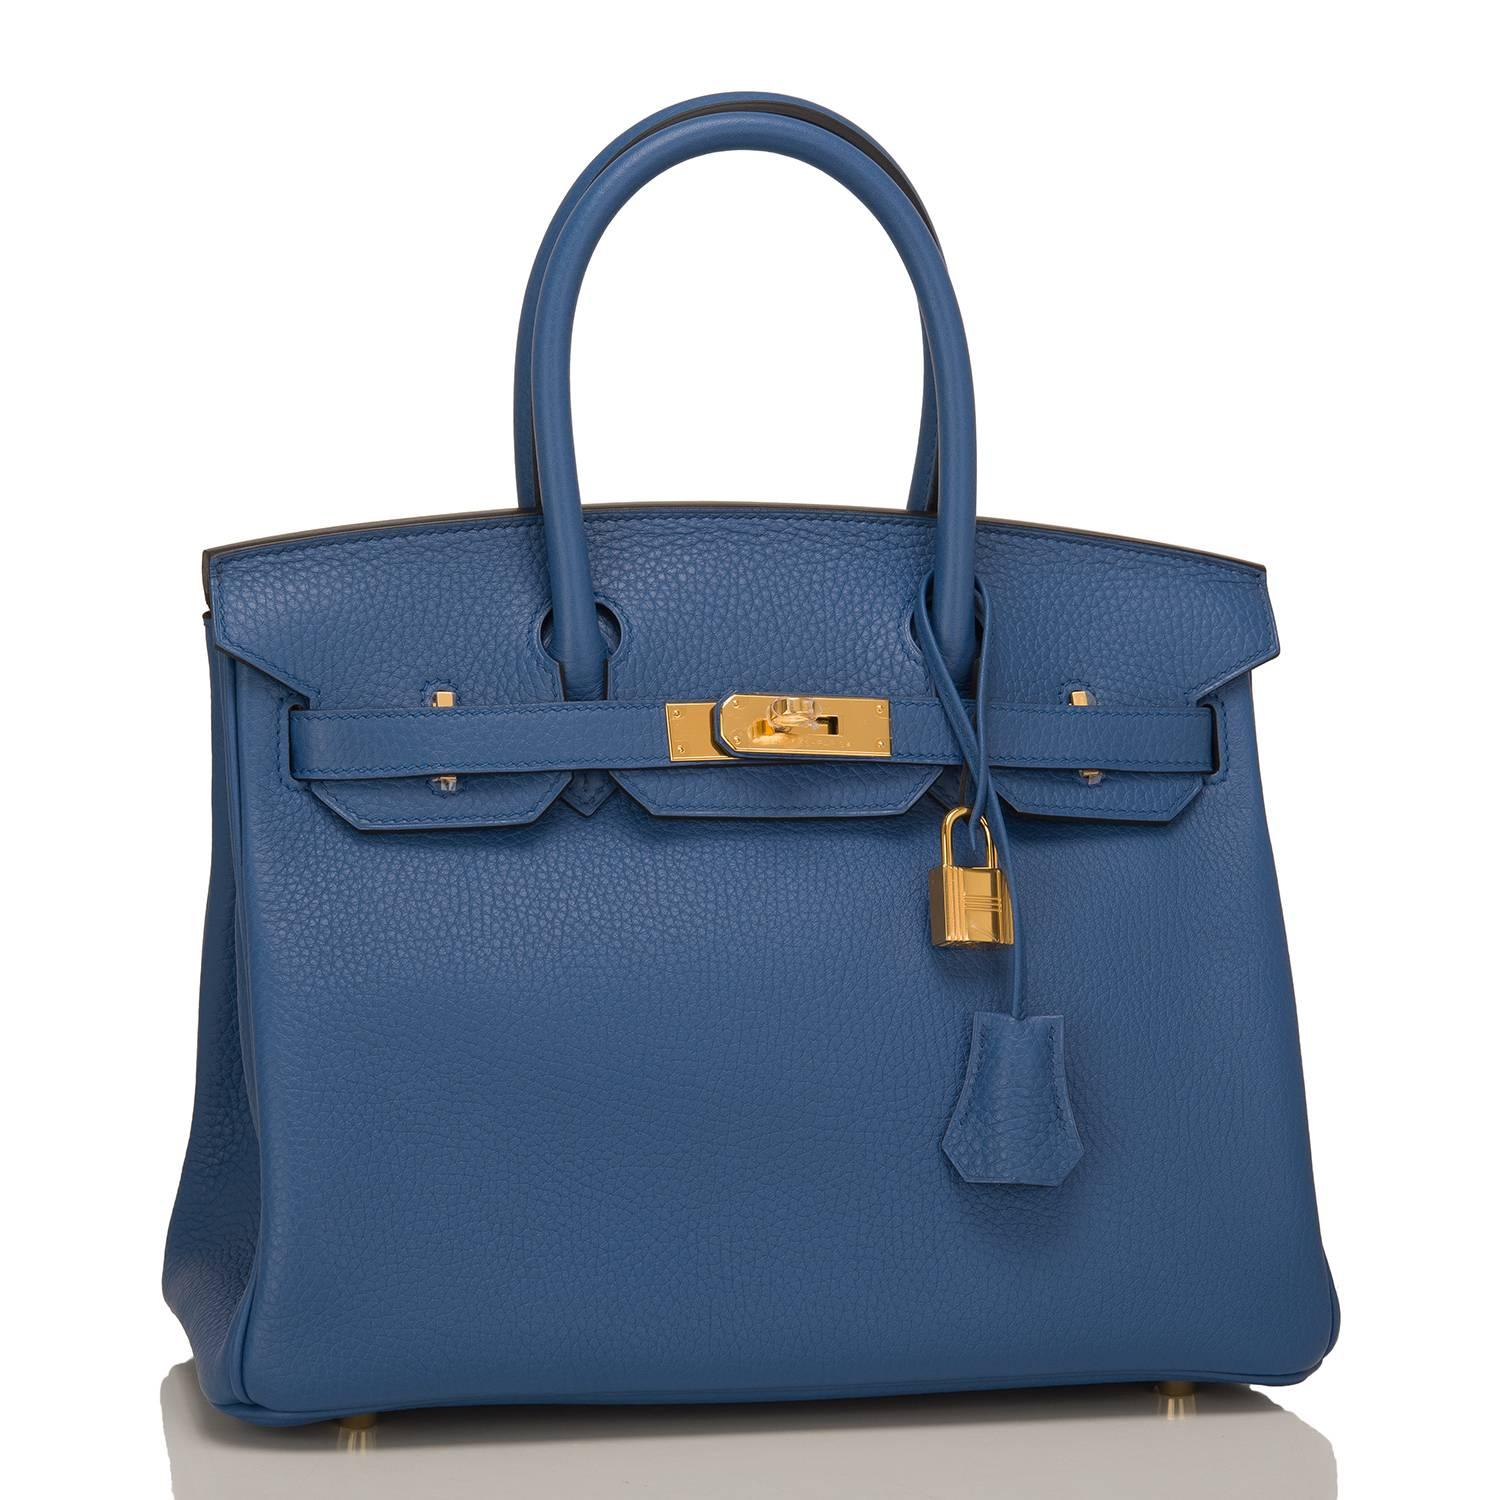 Hermes Bleu Agate Birkin 30cm of Clemence leather with gold hardware.

This Birkin has tonal stitching, a front toggle closure, a clochette with lock and two keys, and double rolled handles.

The interior is lined with Blue Agate chevre and has